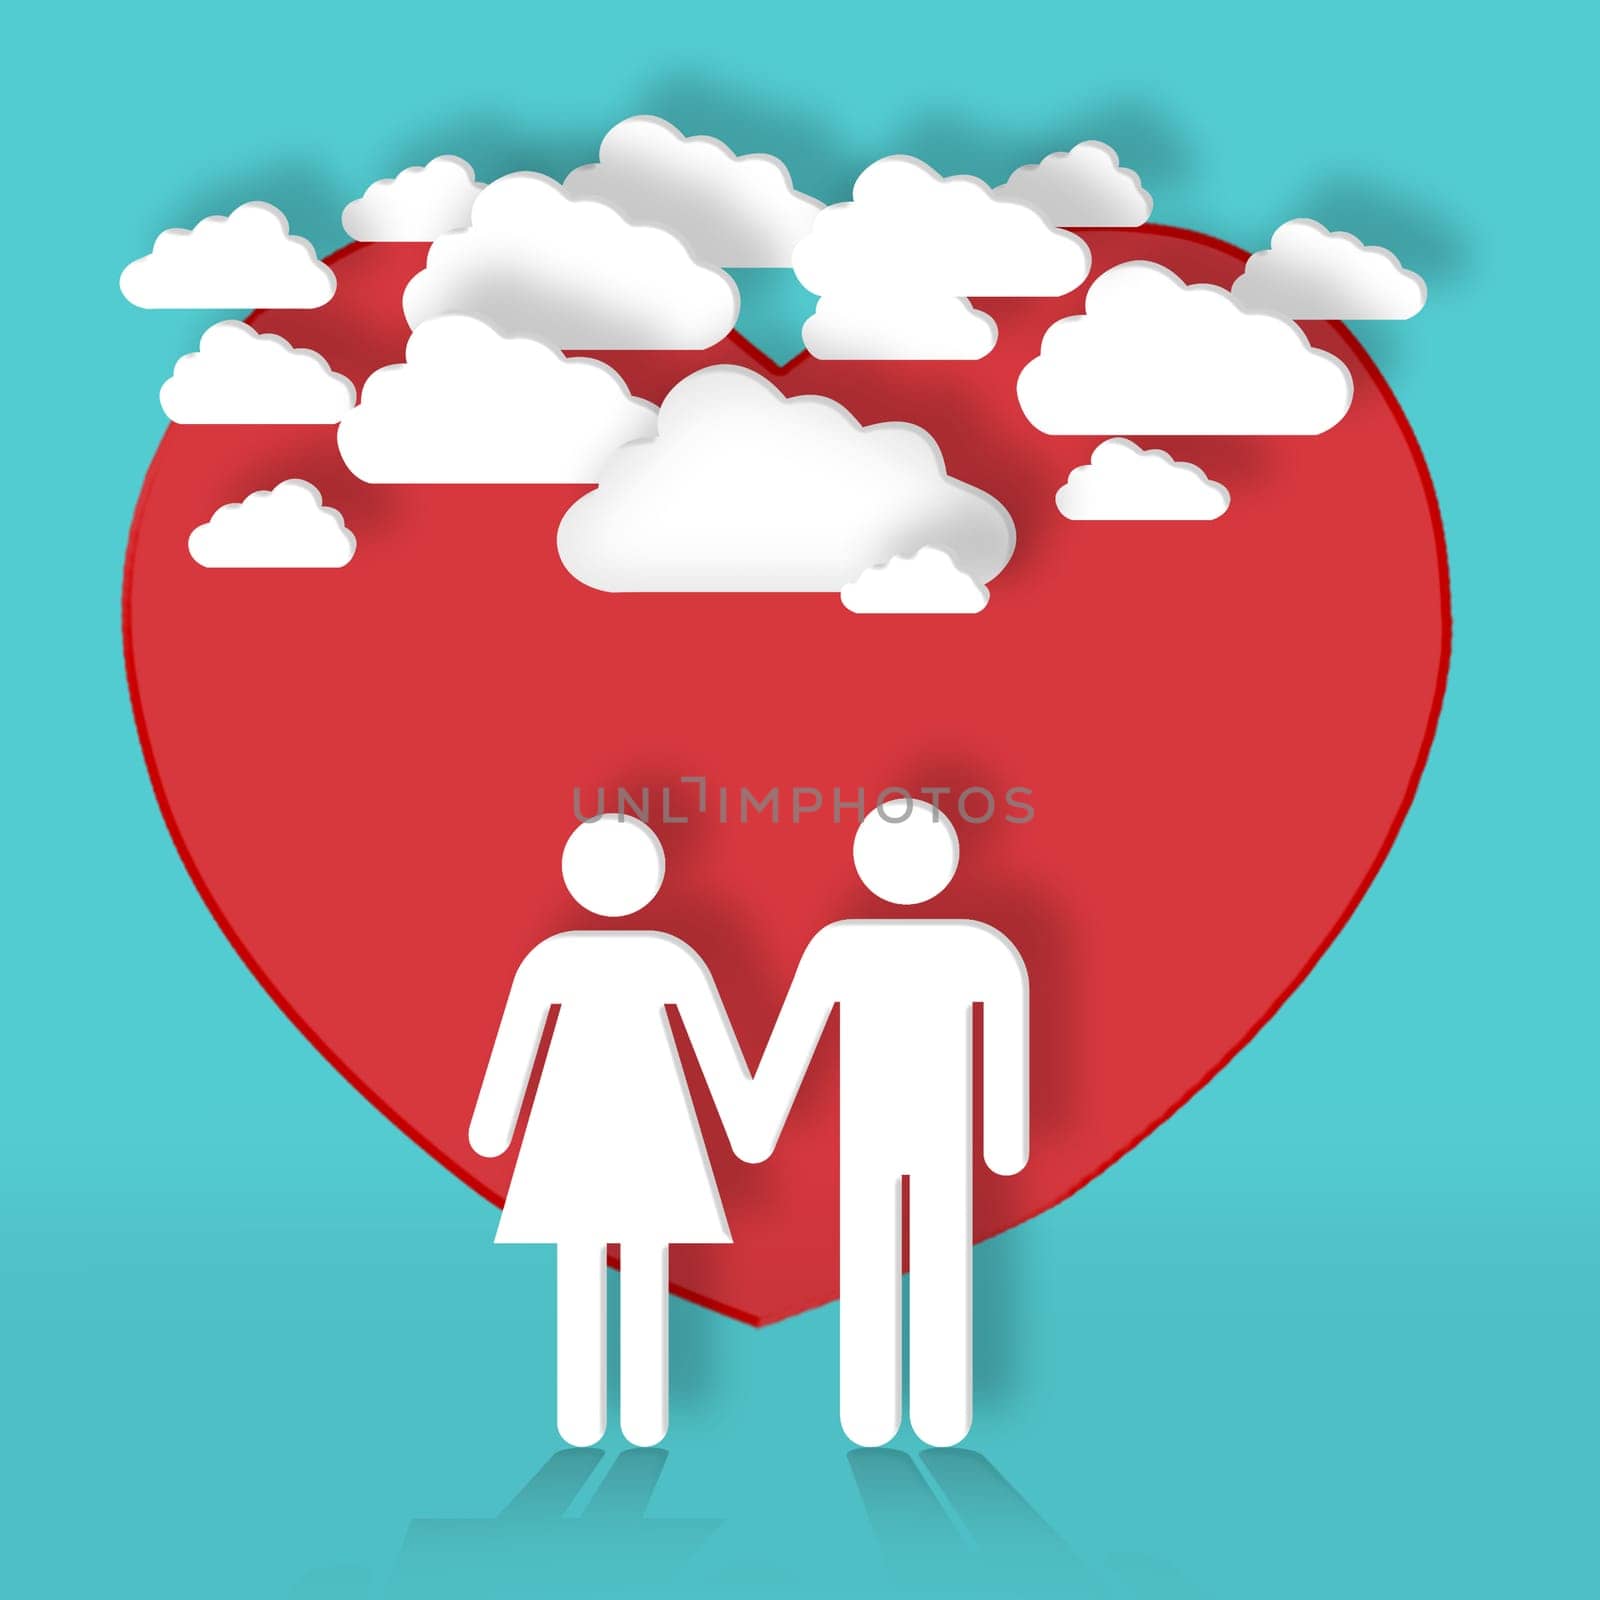 Graphic, couple and cartoon of heart for love for support, valentines day or marriage symbol. Studio background, clouds or illustration of wallpaper or holding hands for care, design or romance.